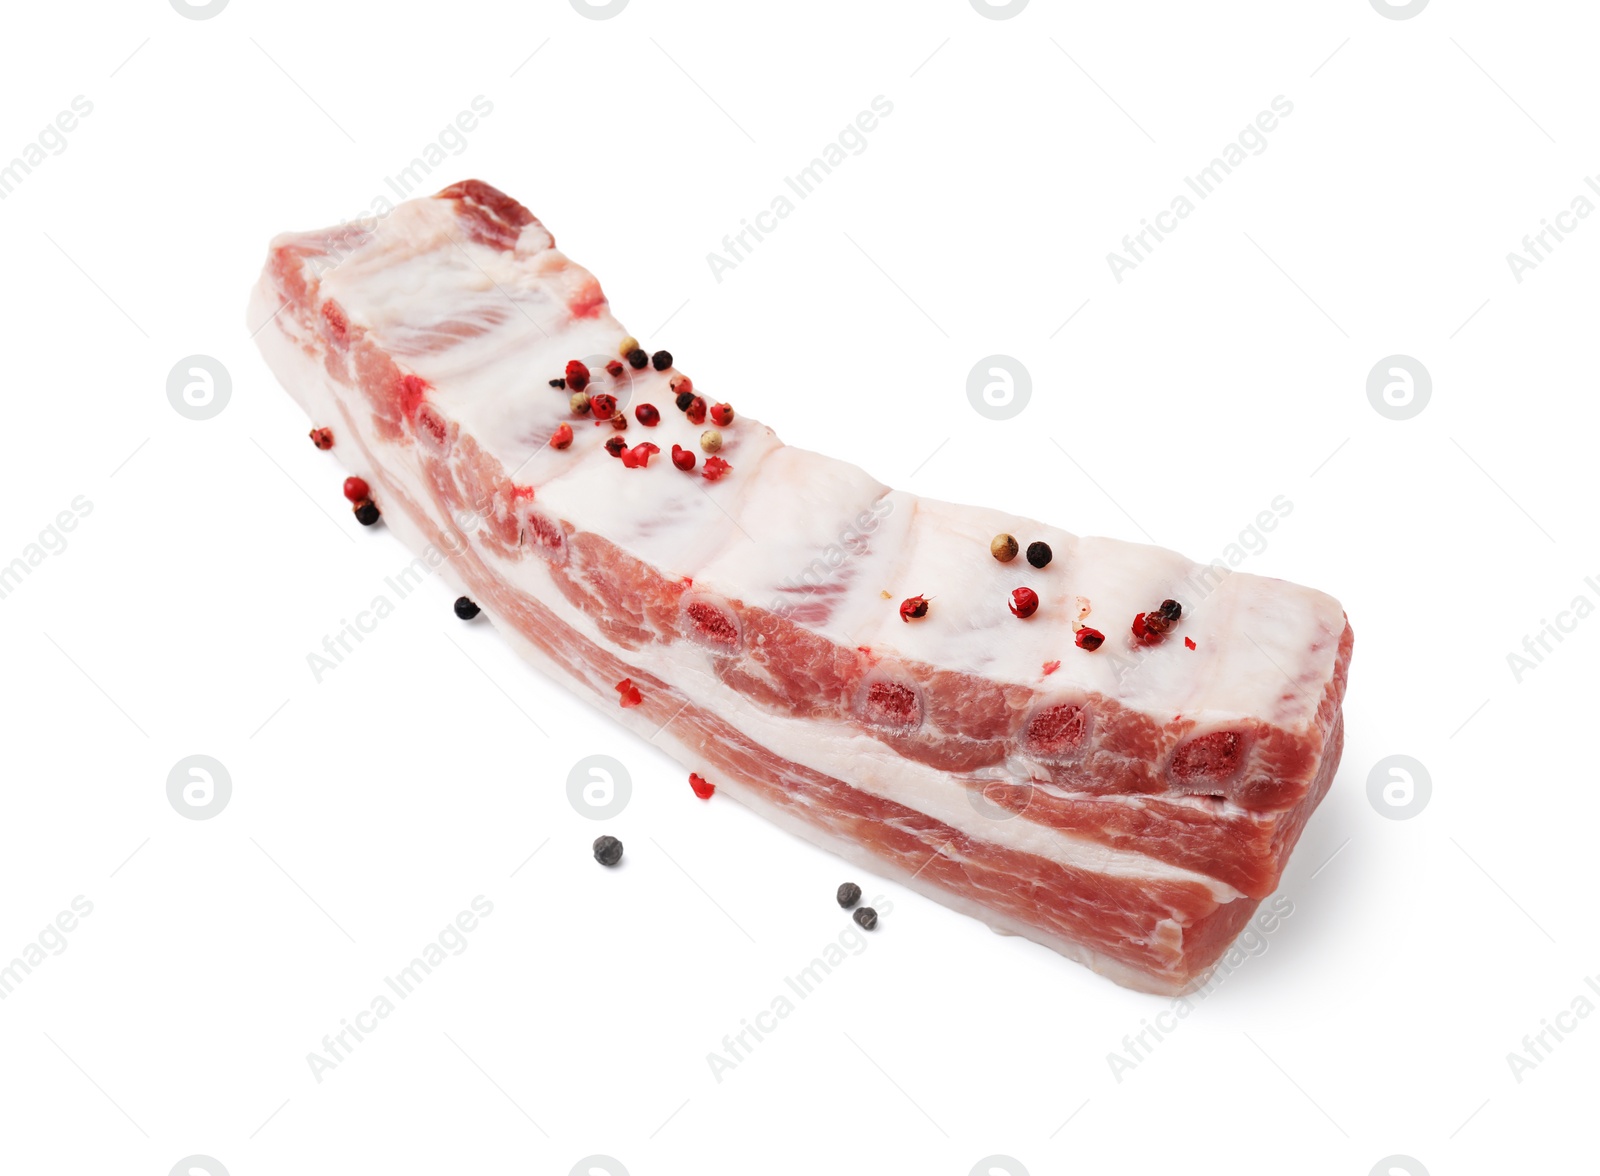 Photo of Raw pork ribs with peppercorns isolated on white